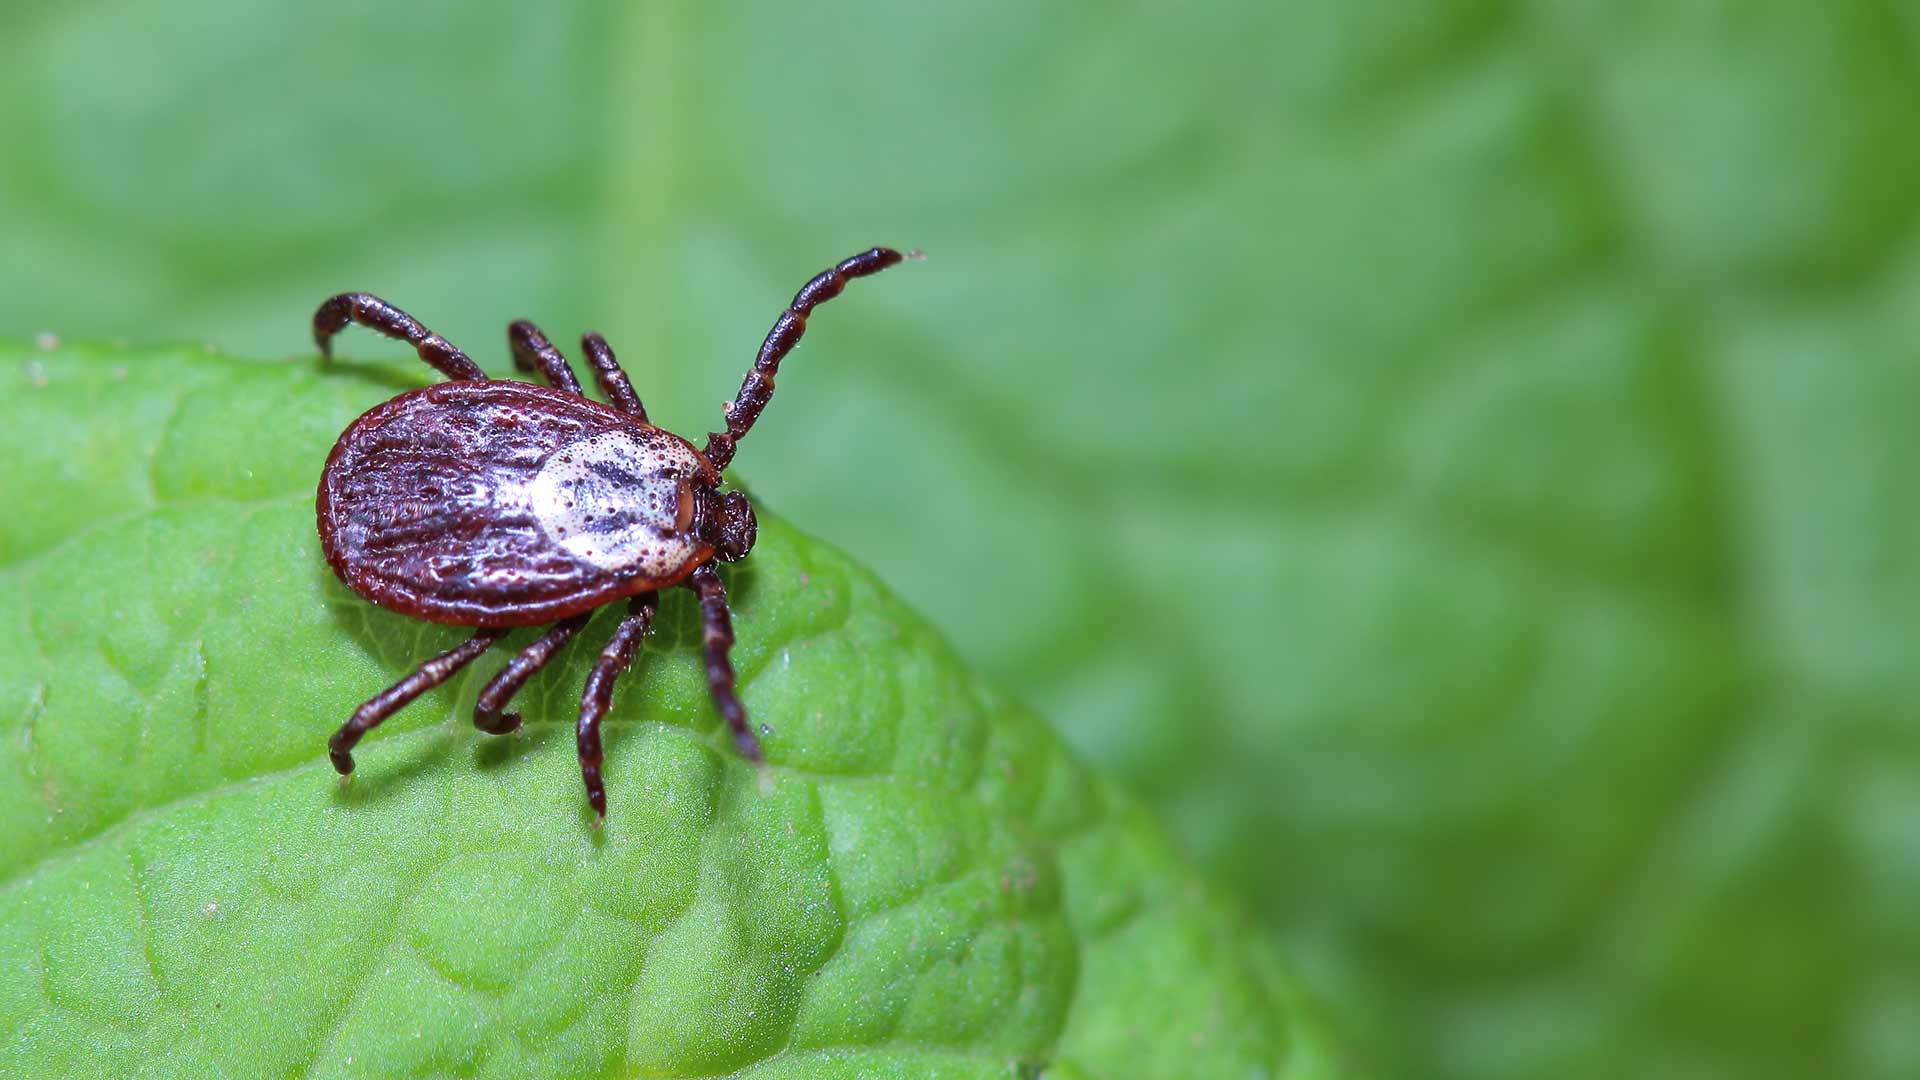 Pennsylvania’s 2022 Tick Season Is Worse Than Ever Before - Here’s What to Do